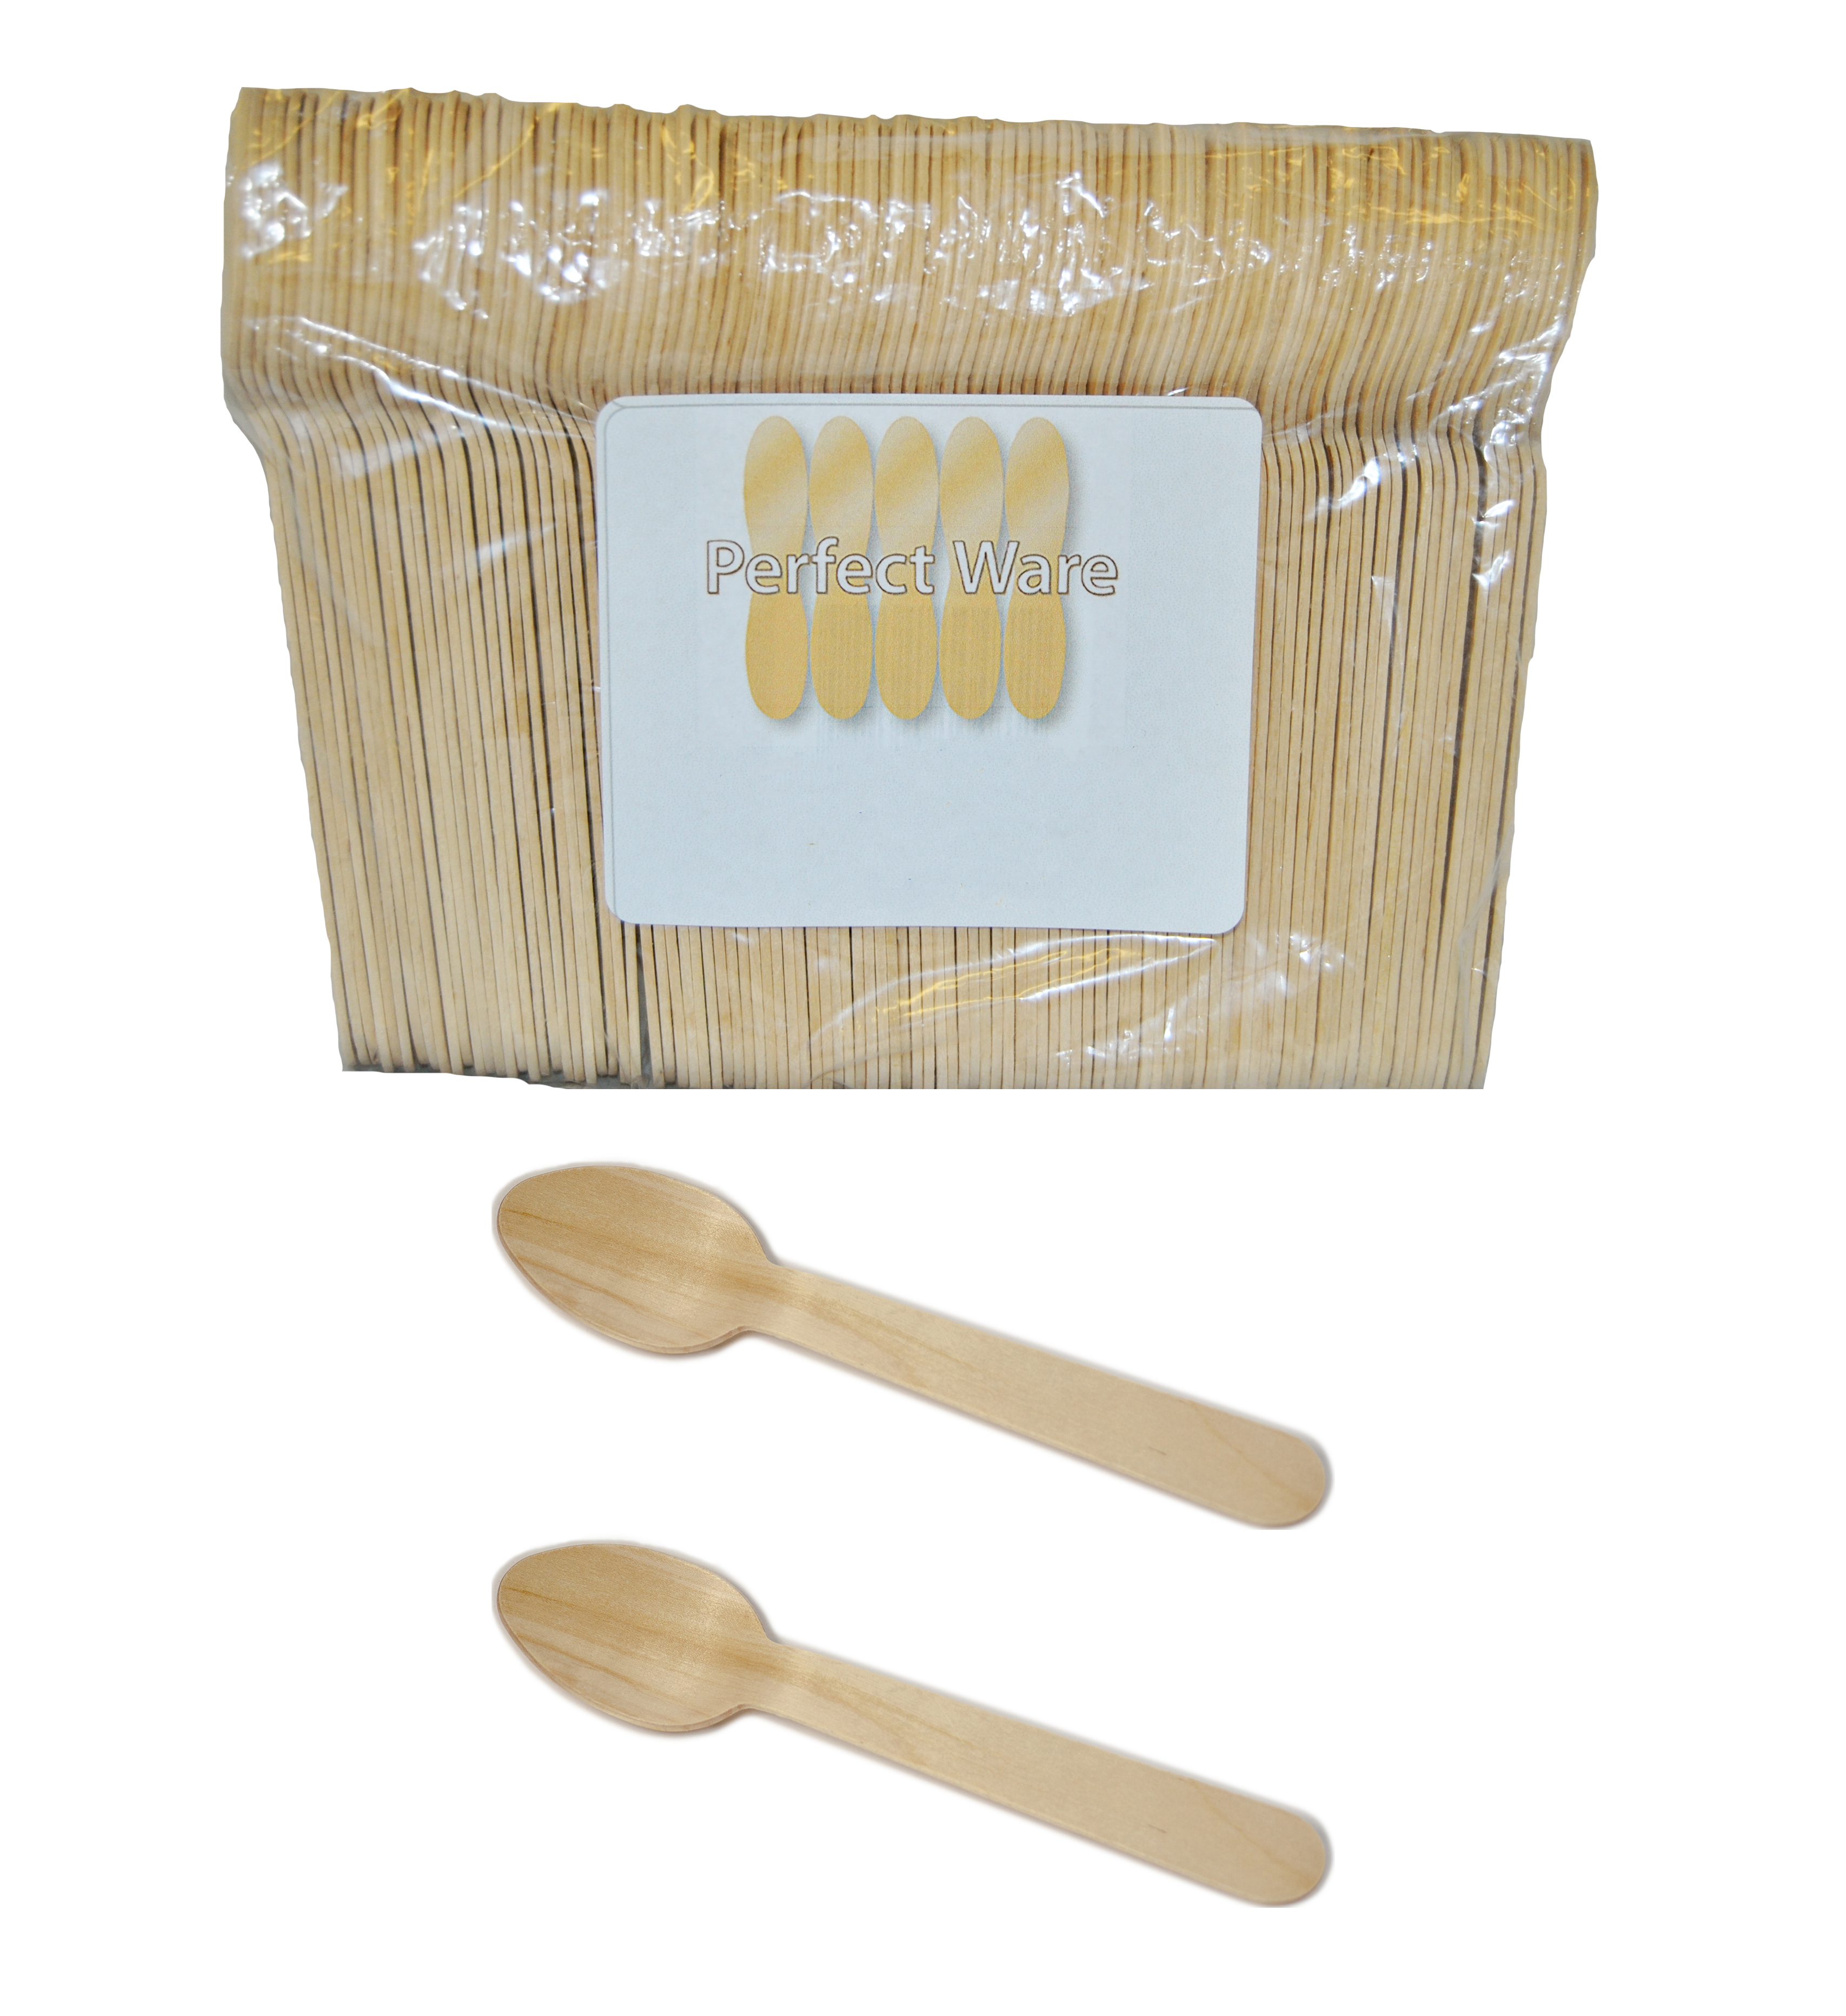 6" Wood Premium Perfect Ware  Cutlery Spoons. Case of 1,000ct (Item# Perfect Ware 165SP)